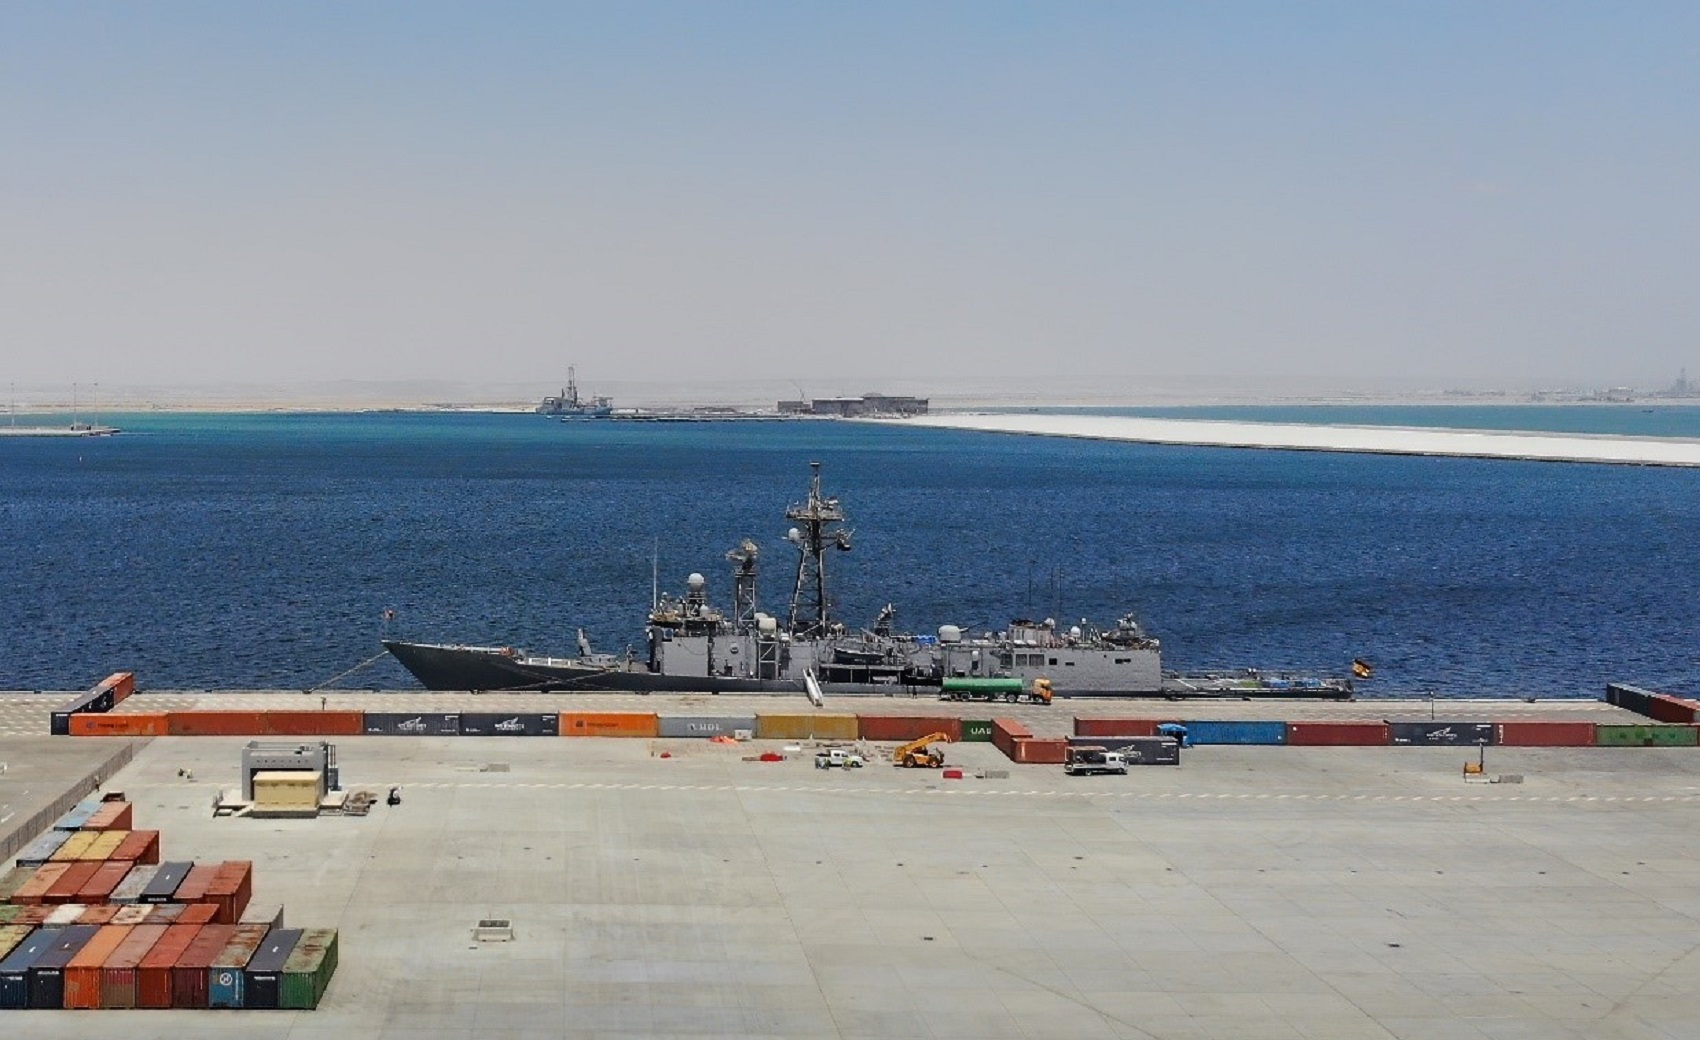 Frigate ‘Santa María’, the first Spanish vessel to visit the port of Duqm in Oman